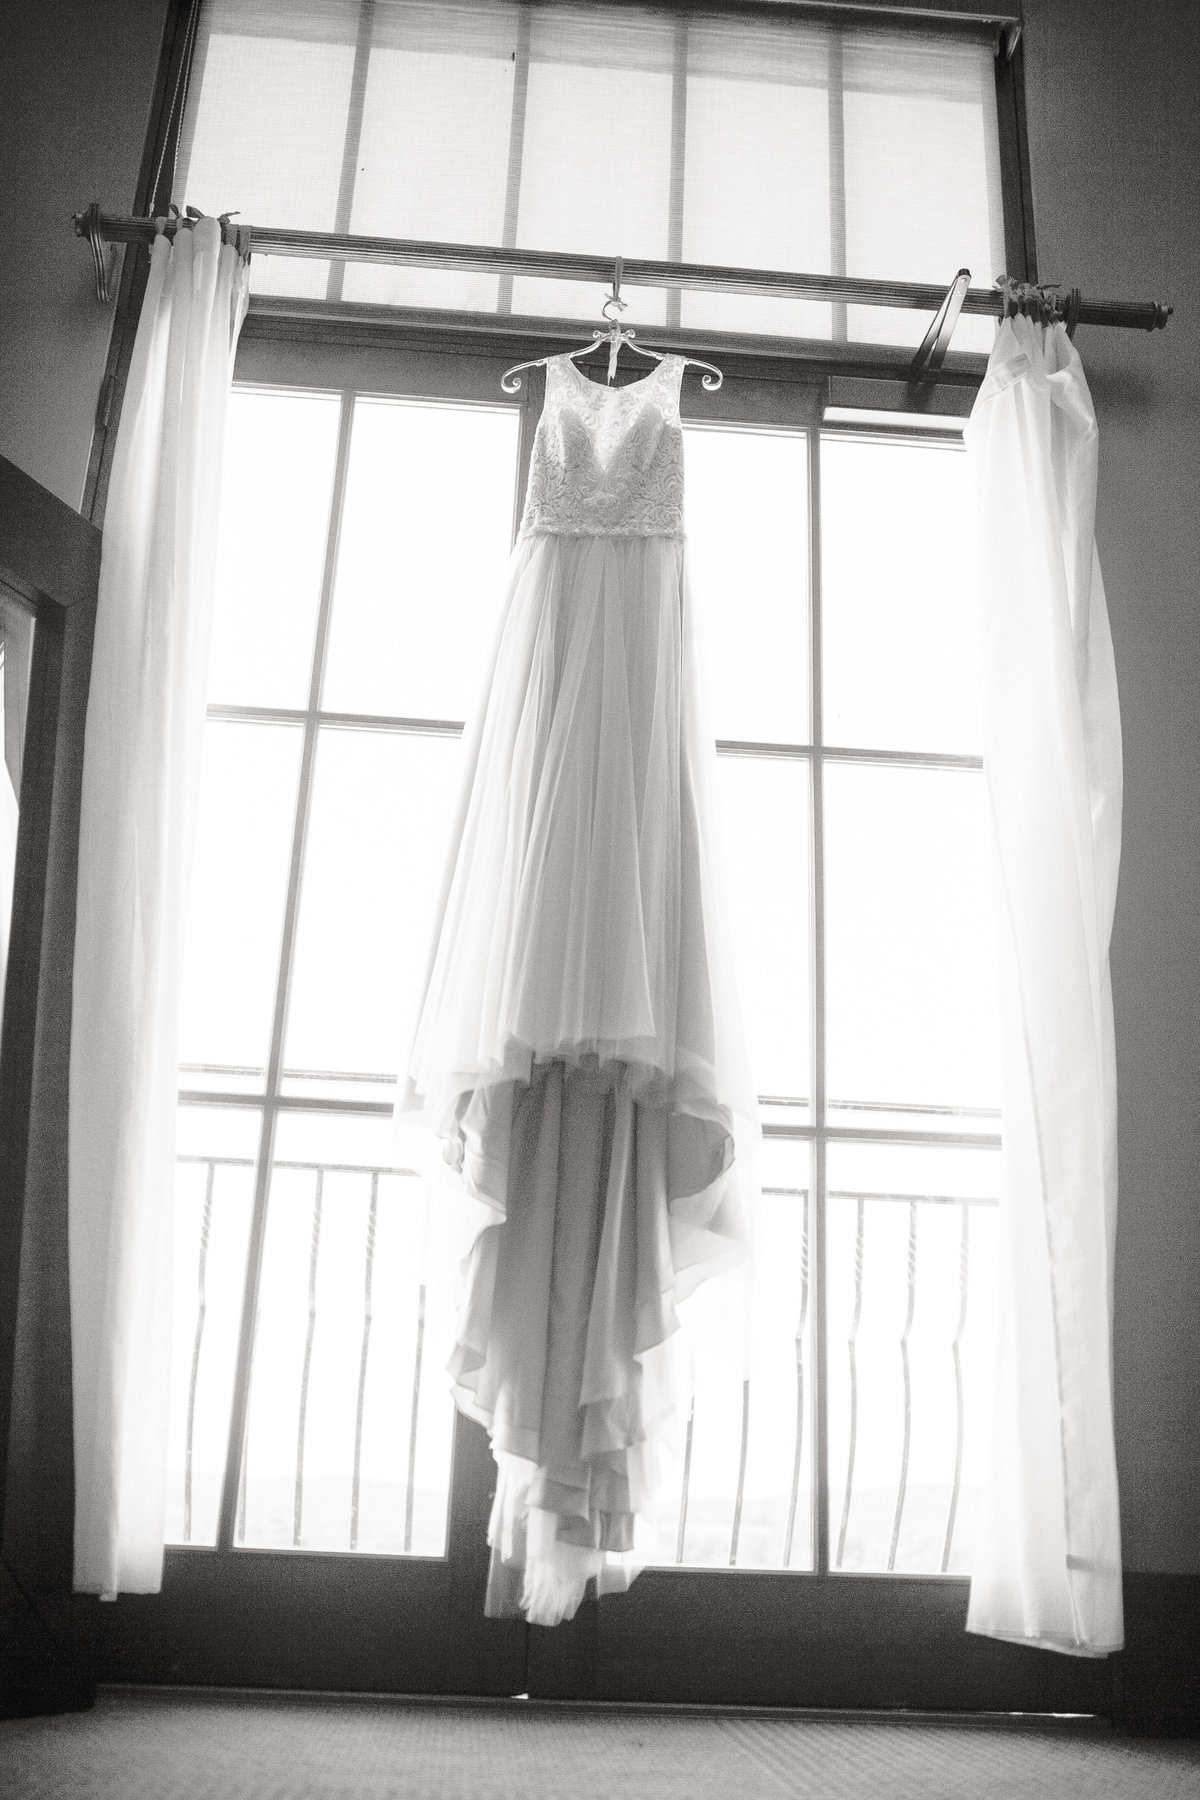 B&W image of wedding dress hanging in the window of the bride's home.